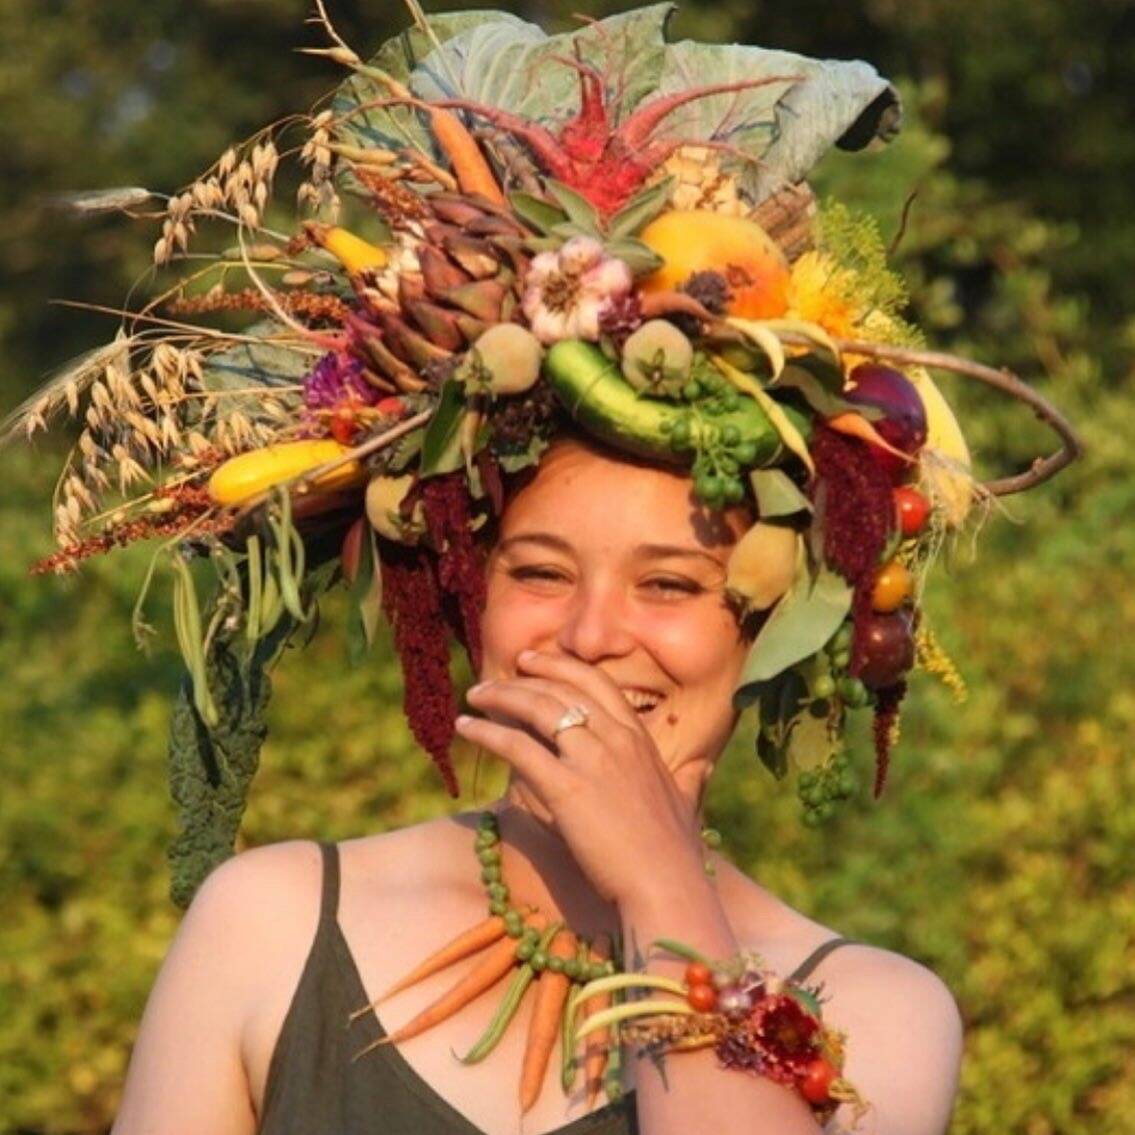 Organic Farm School student Carly Zierke in a creation made by floral designer Tobey Nelson and a dress from edit, a Langley business. (Photo by Clancy Dunigan)